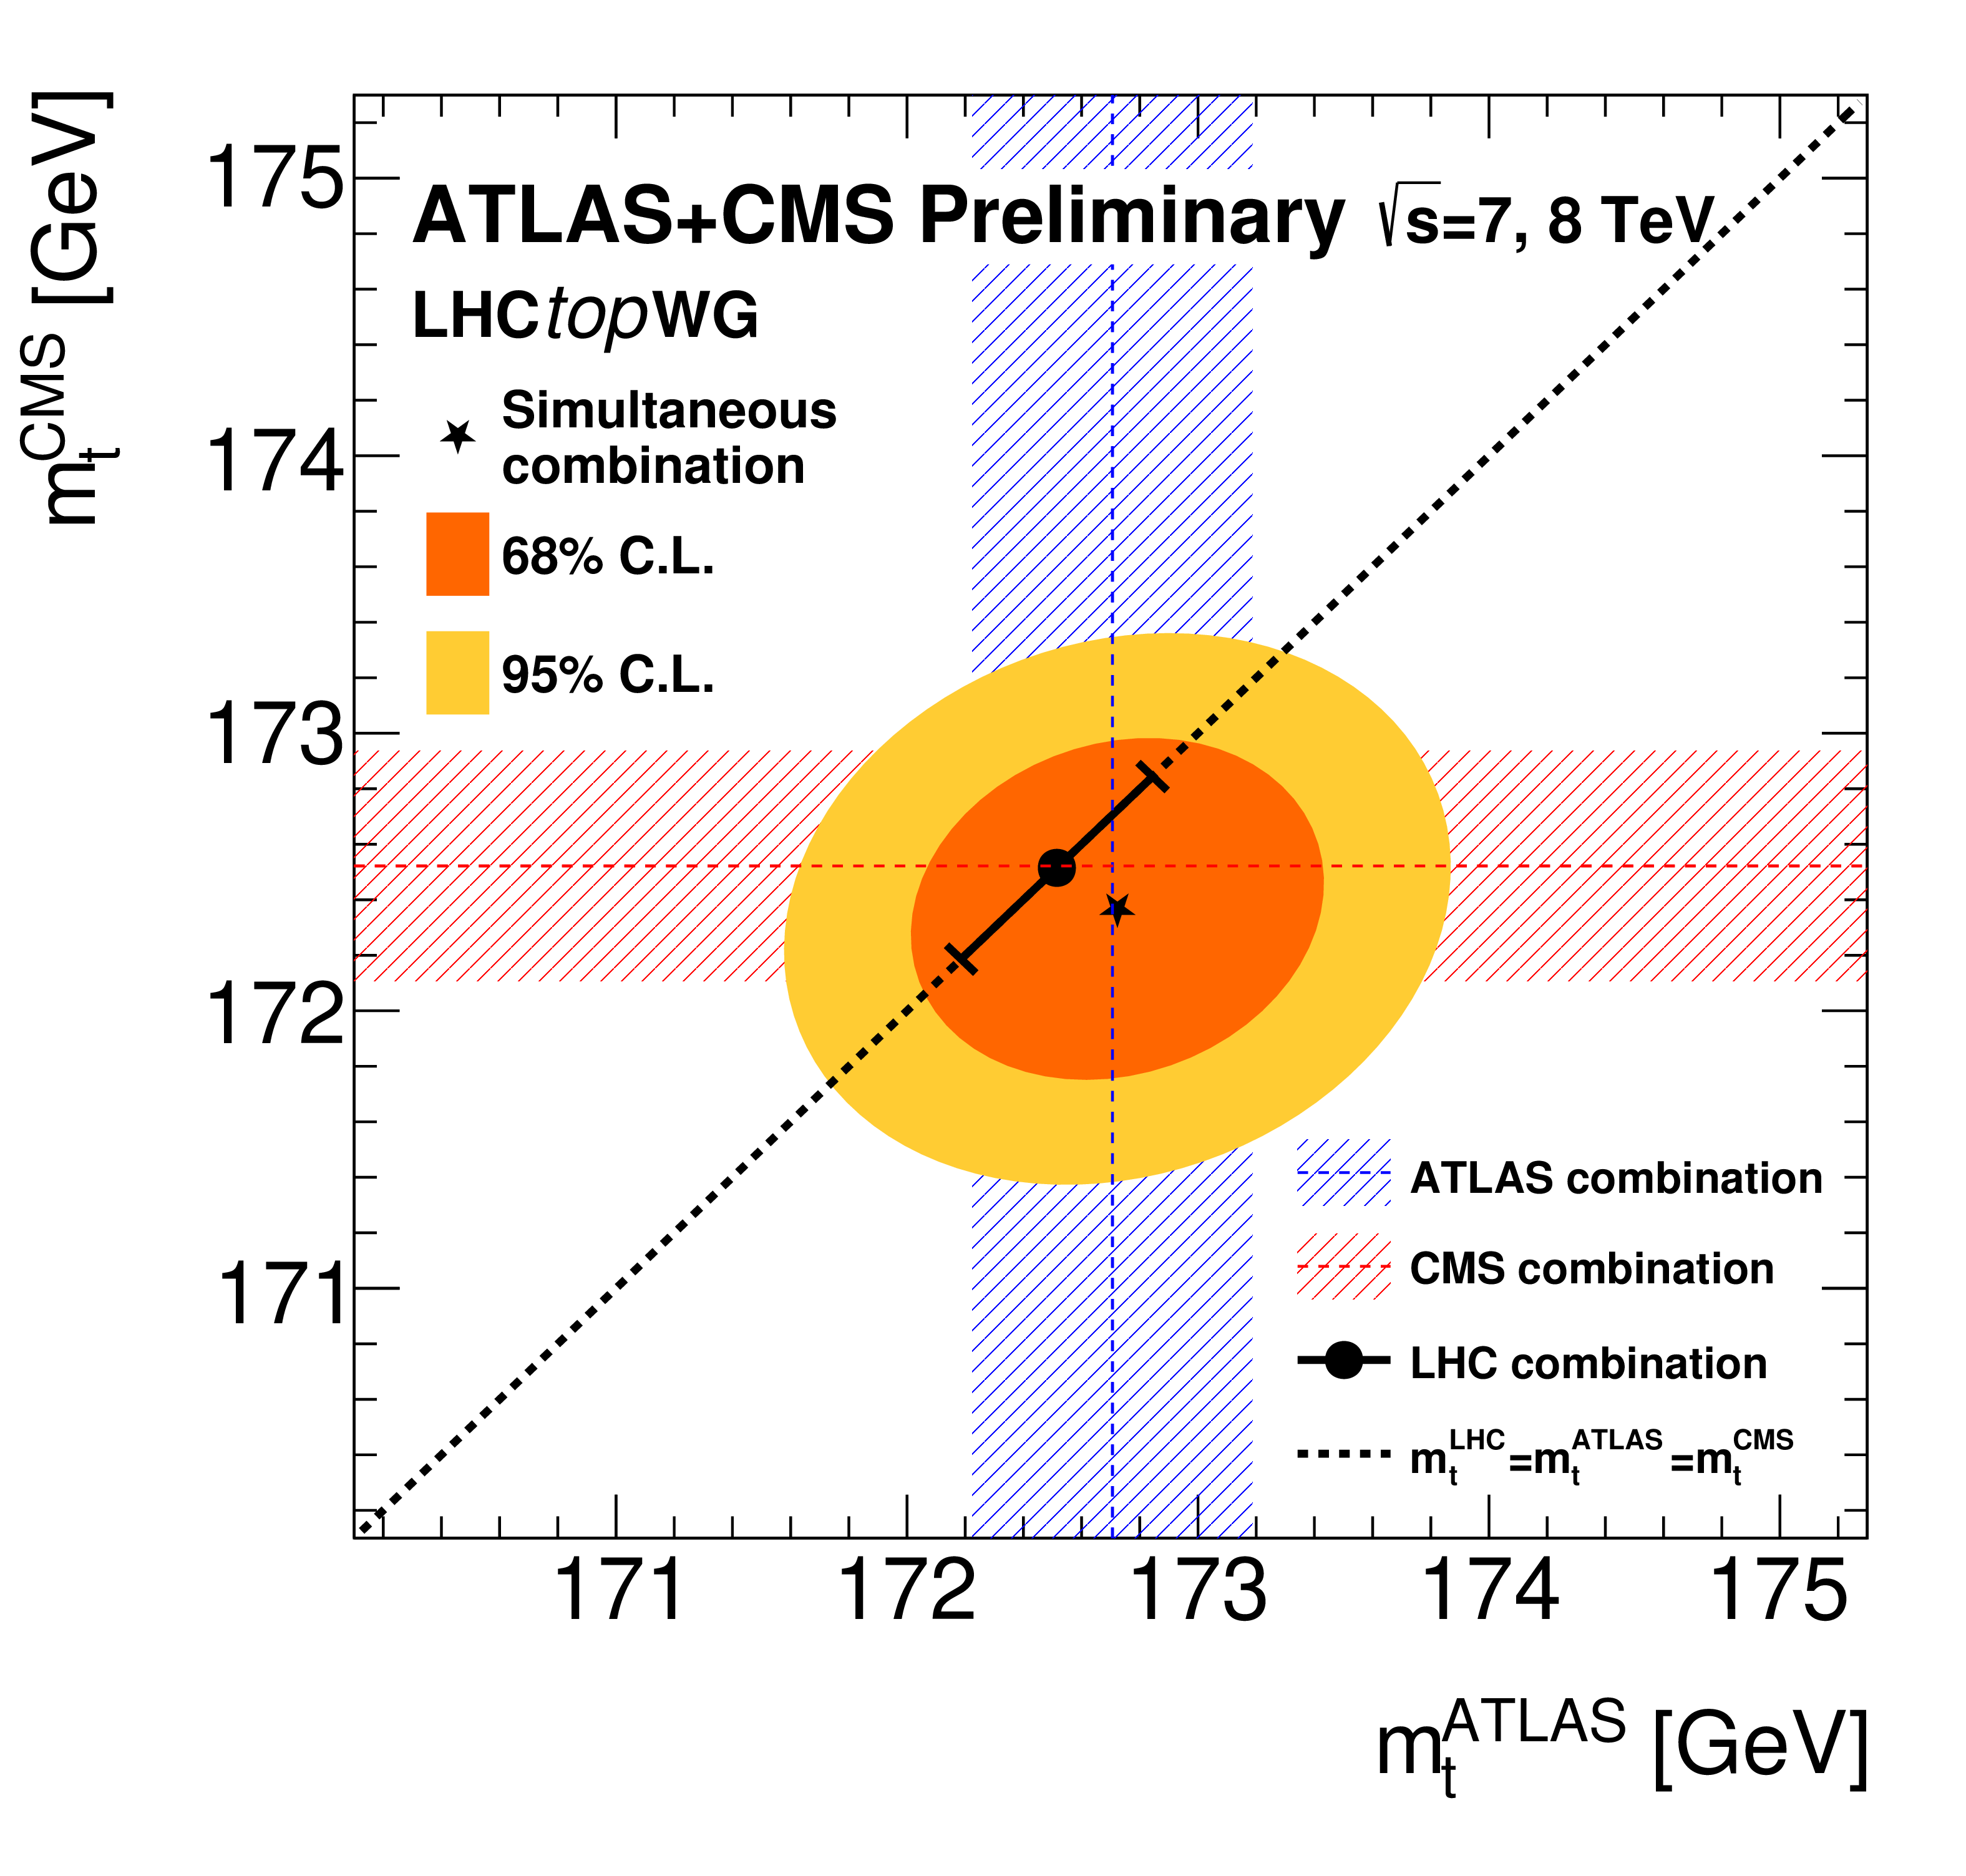 https://cms-results.web.cern.ch/cms-results/public-results/preliminary-results/TOP-22-001/CMS-PAS-TOP-22-001_Figure_0A1.png